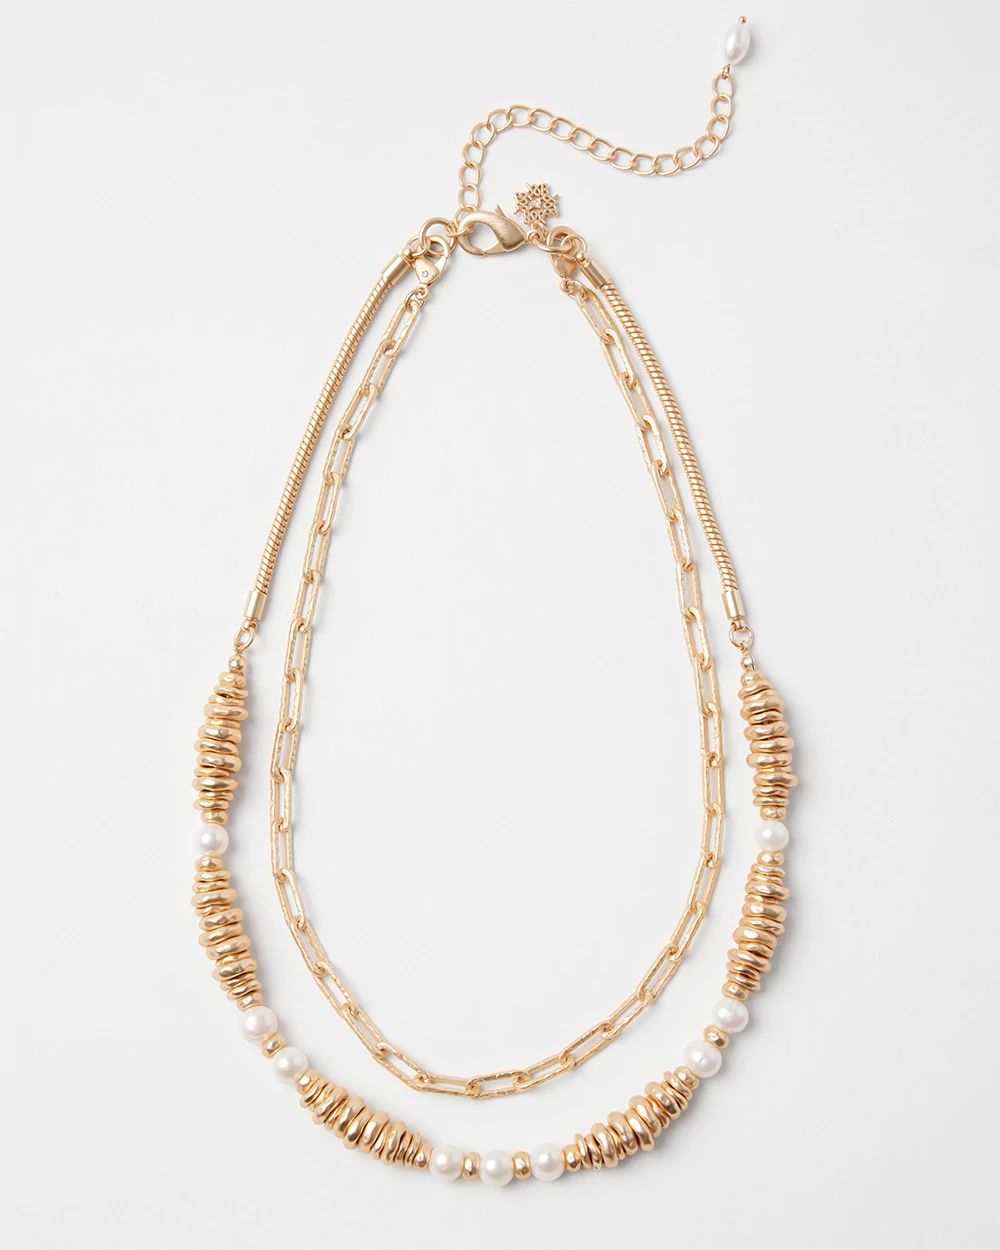 Goldtone and Freshwater Pearl Convertible Necklace